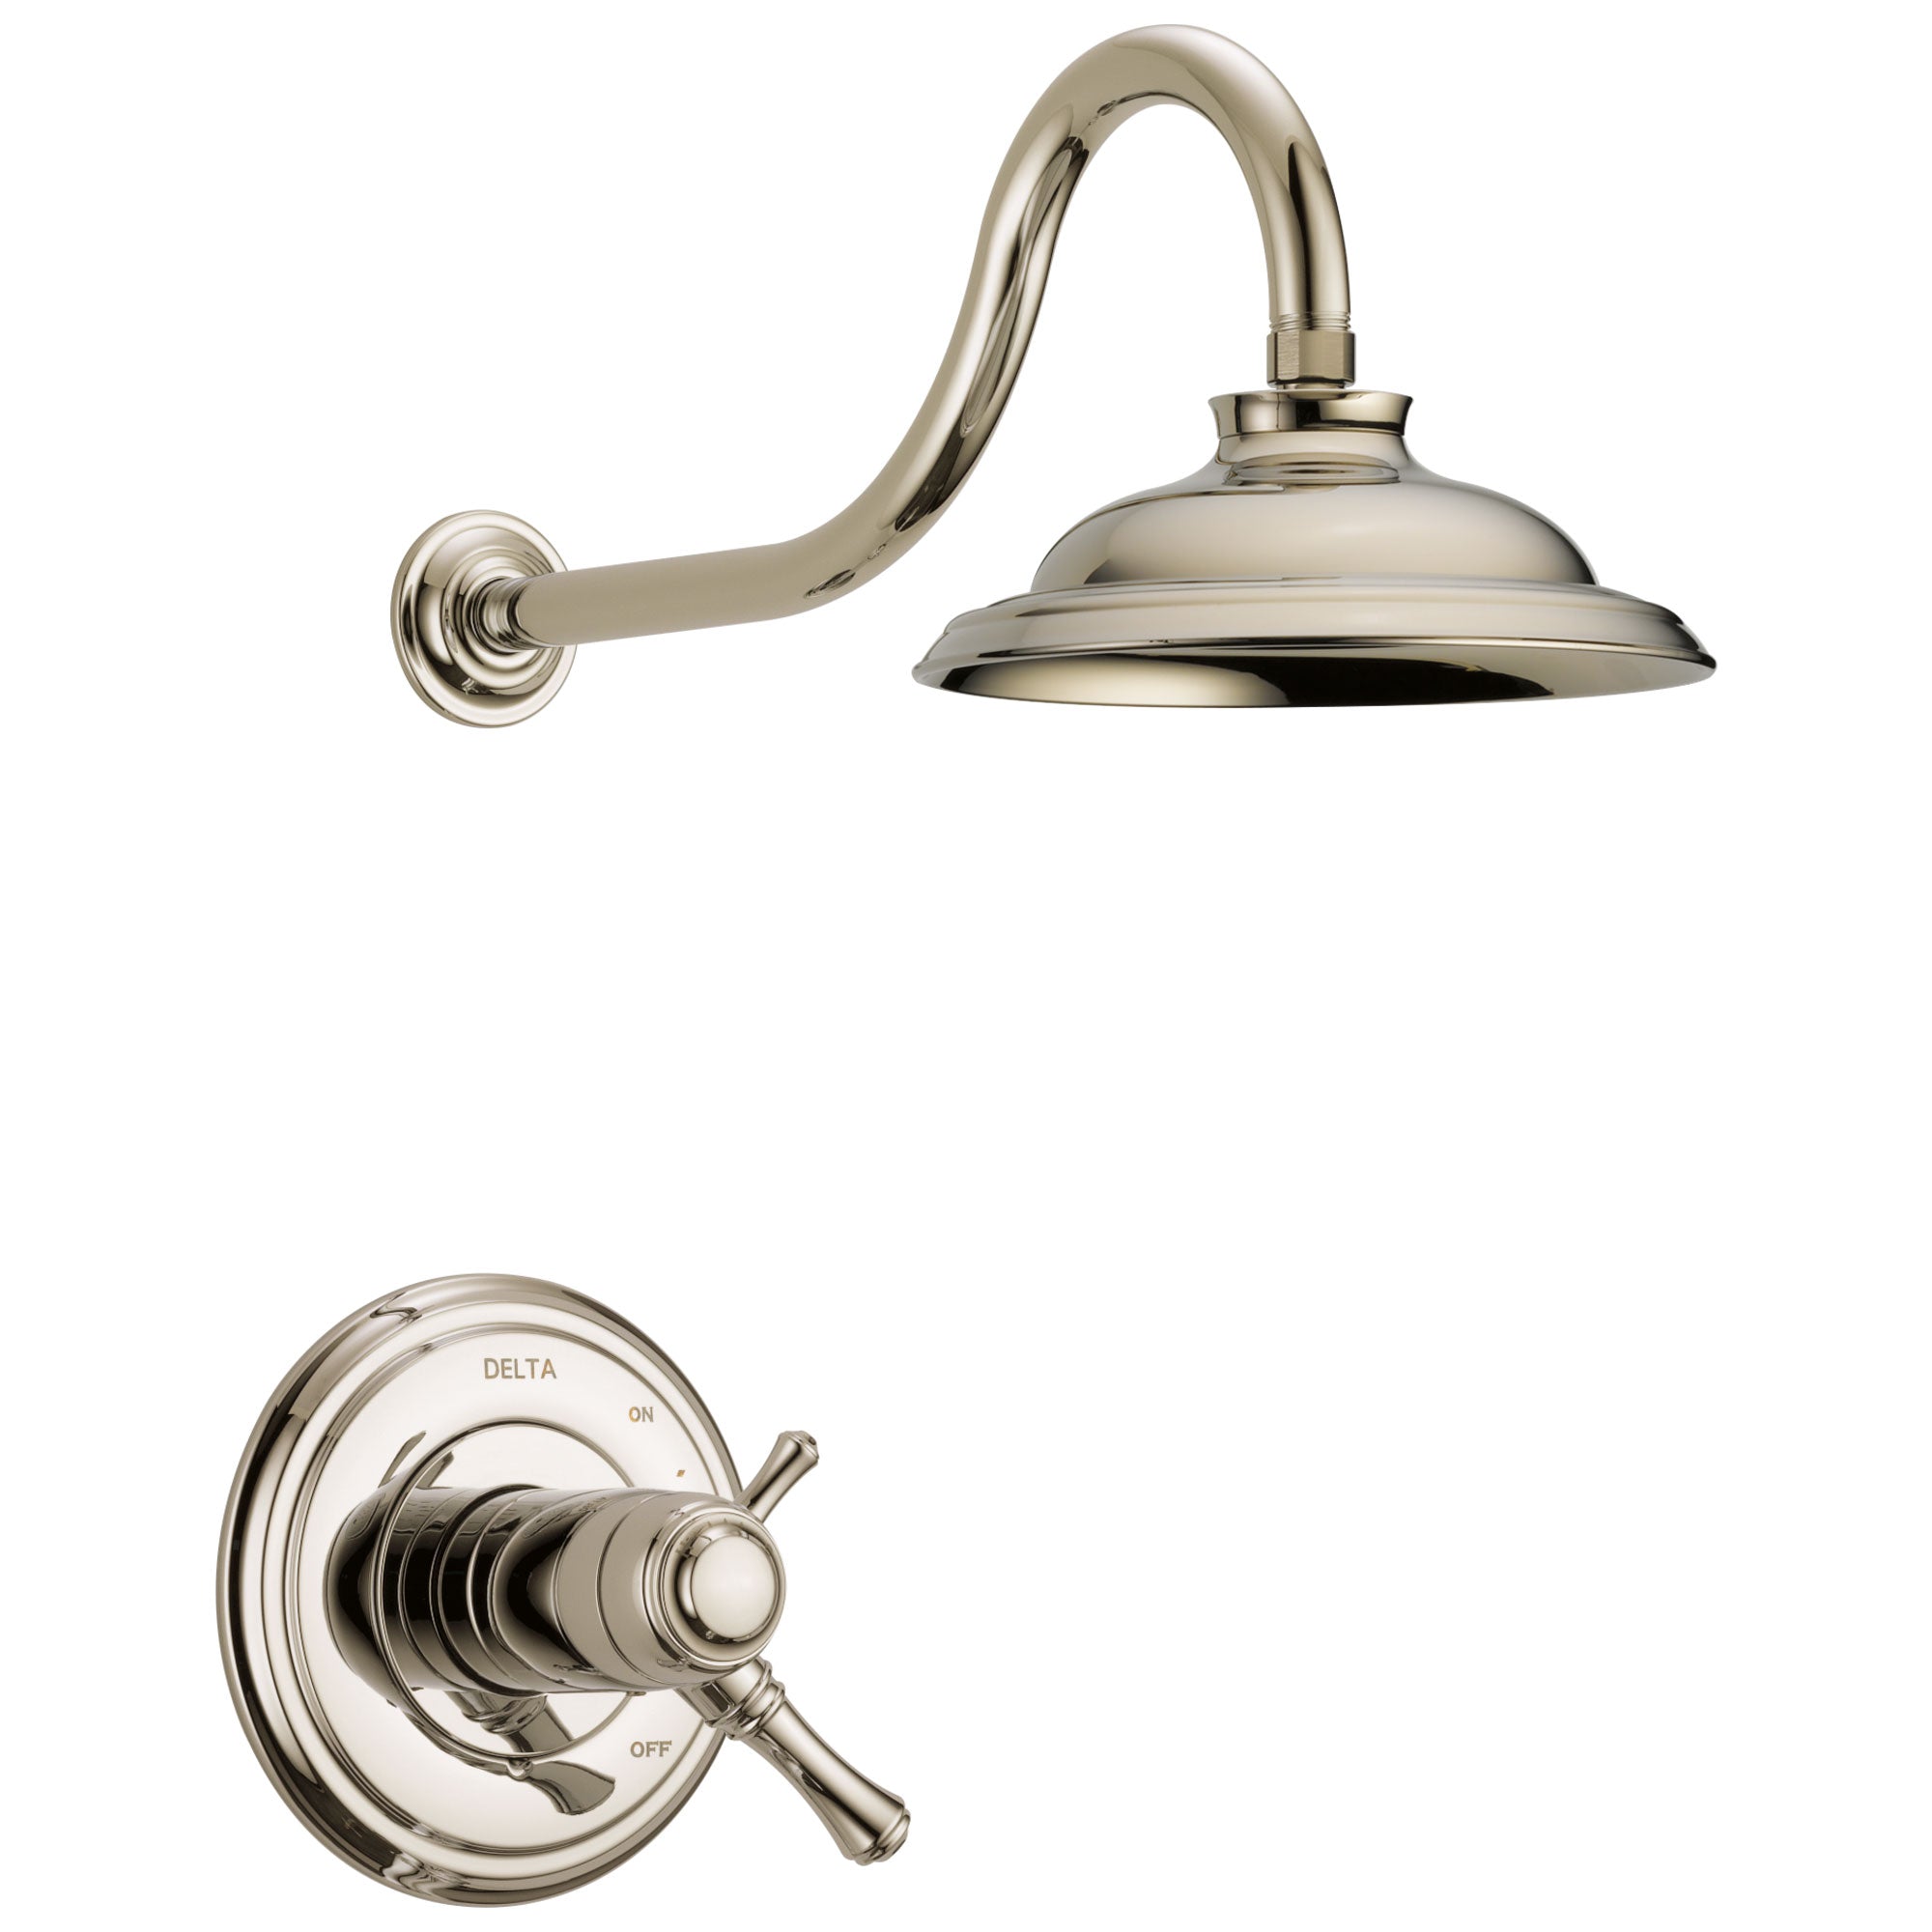 Delta Cassidy Polished Nickel Finish TempAssure Water Efficient Shower only Faucet Includes 17T Cartridge, Handles, and Valve with Stops D3274V